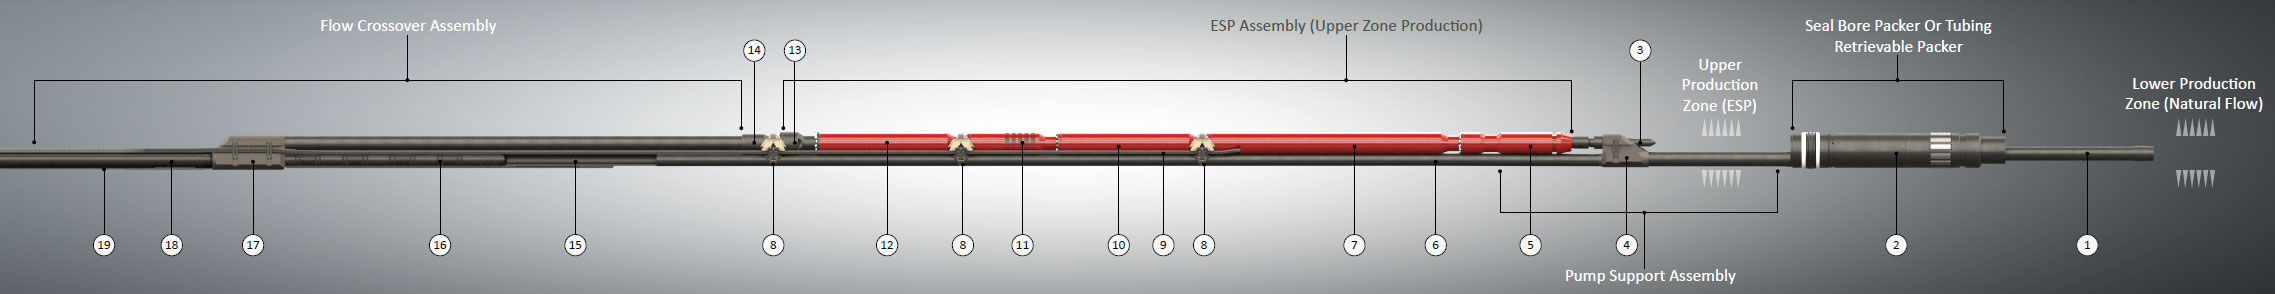 Upper Zone ESP / Lower Zone Natural Flow (Seal Bore Packer Or Tubing Retrievable Packer)